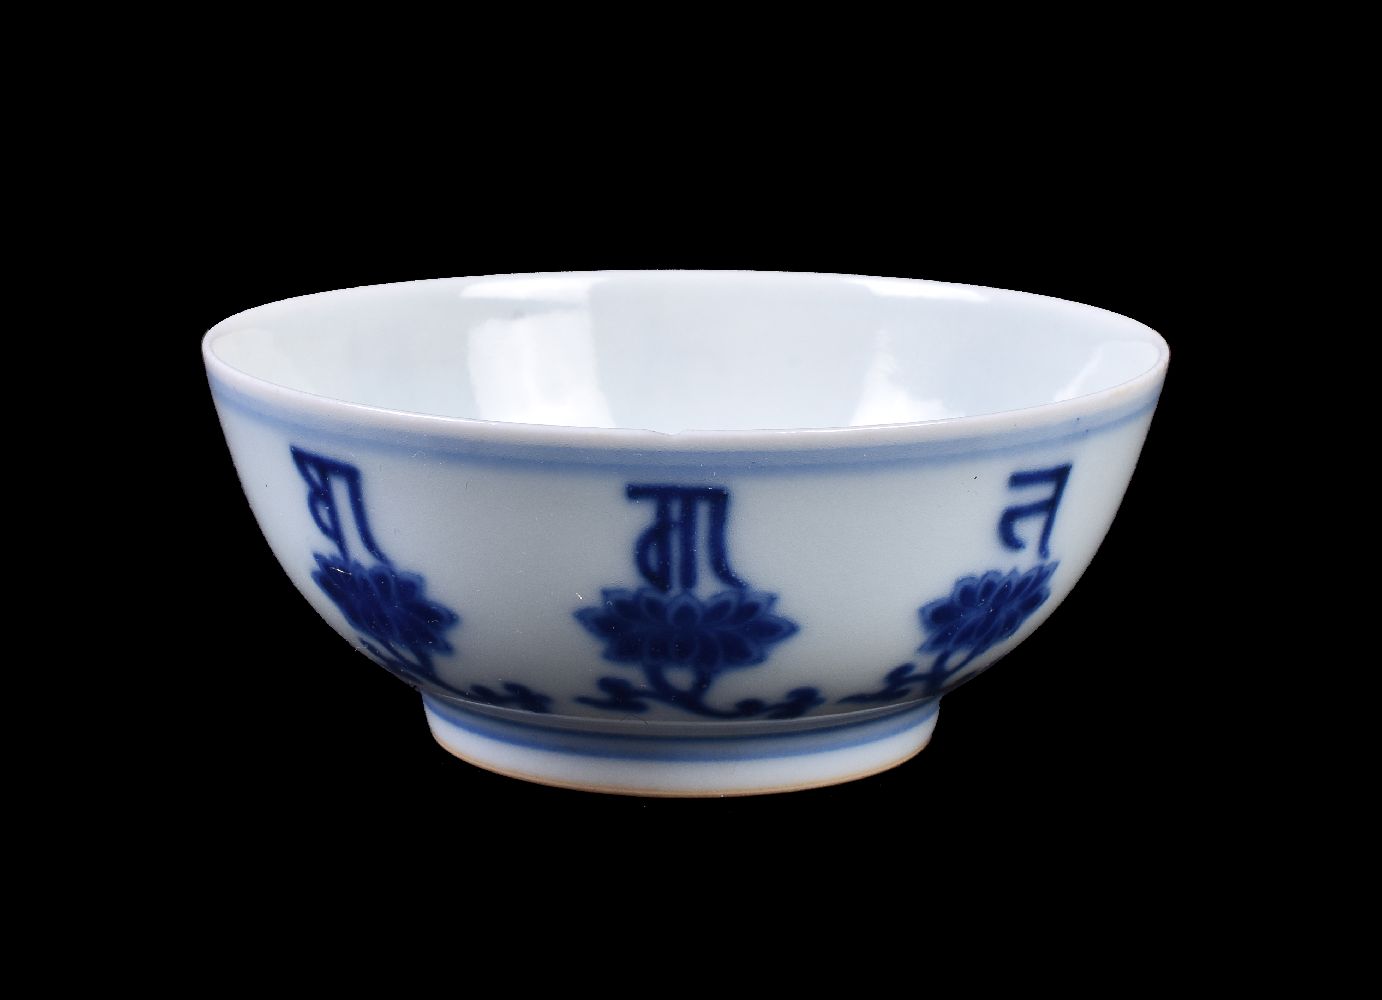 A Chines blue and white bowl with Lança characters